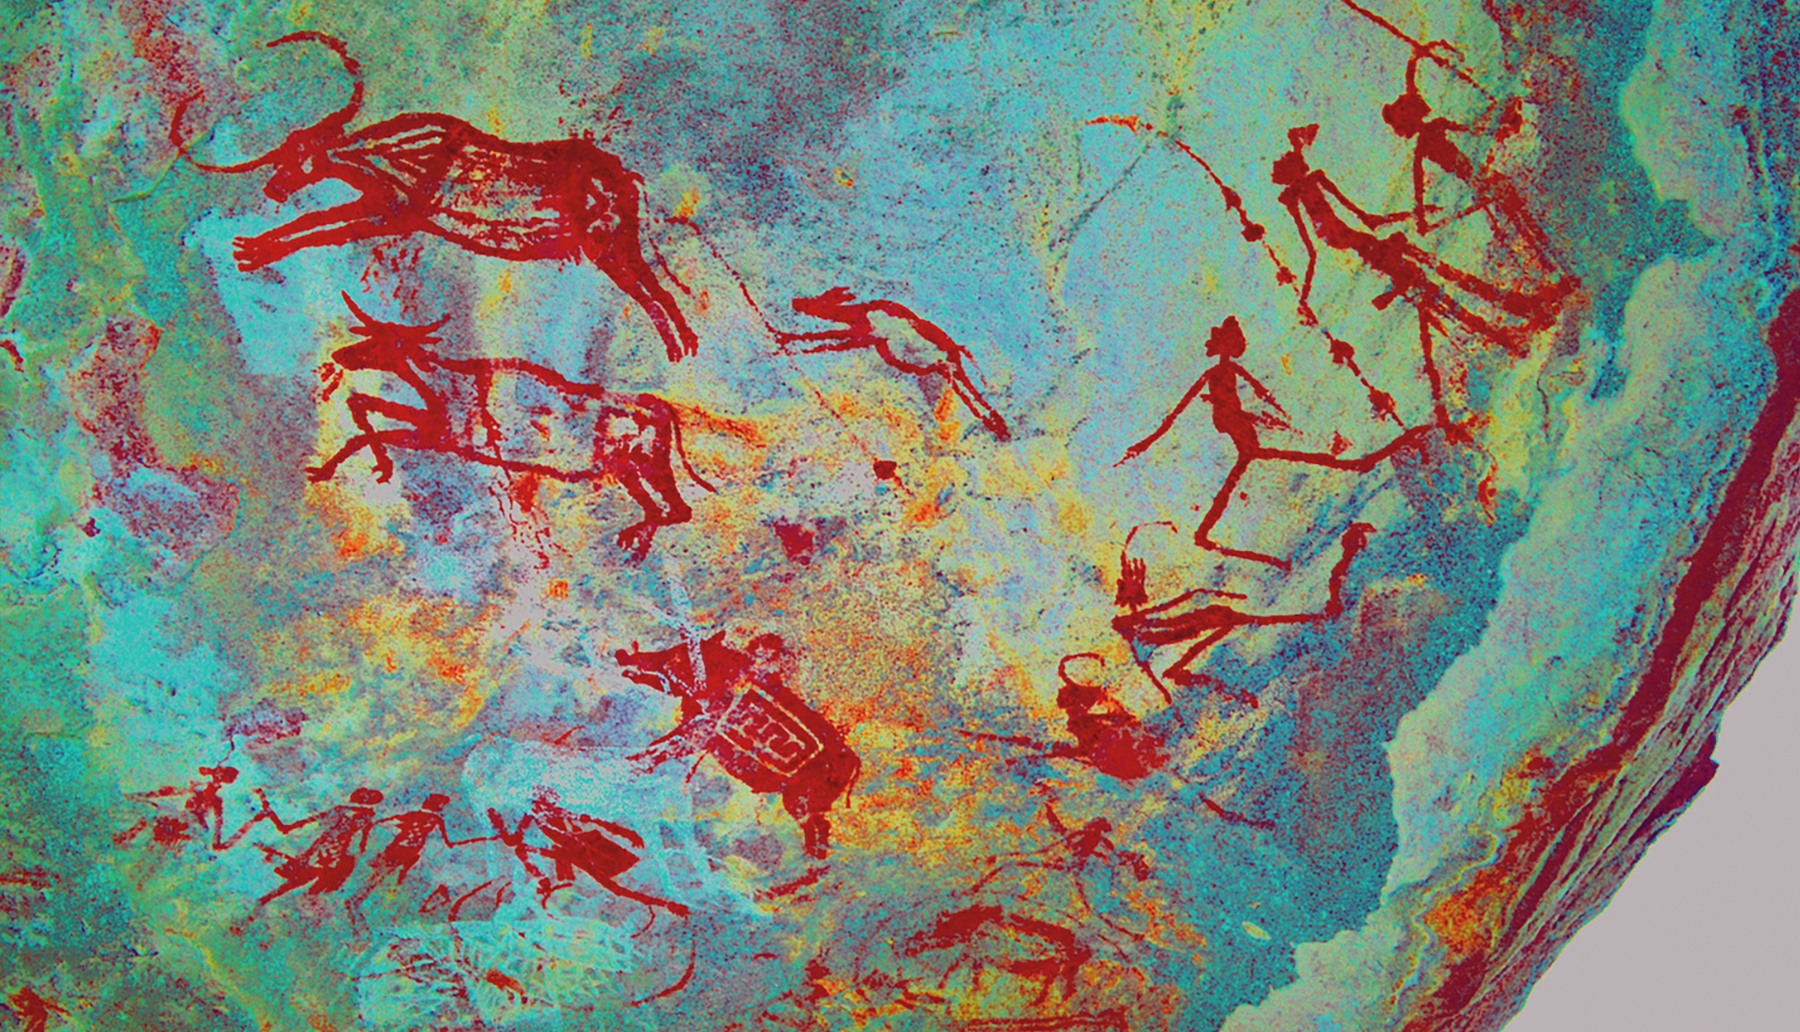 Women Hunters in Indian Rock Art Hunting game men and women hunters are chasing animals.